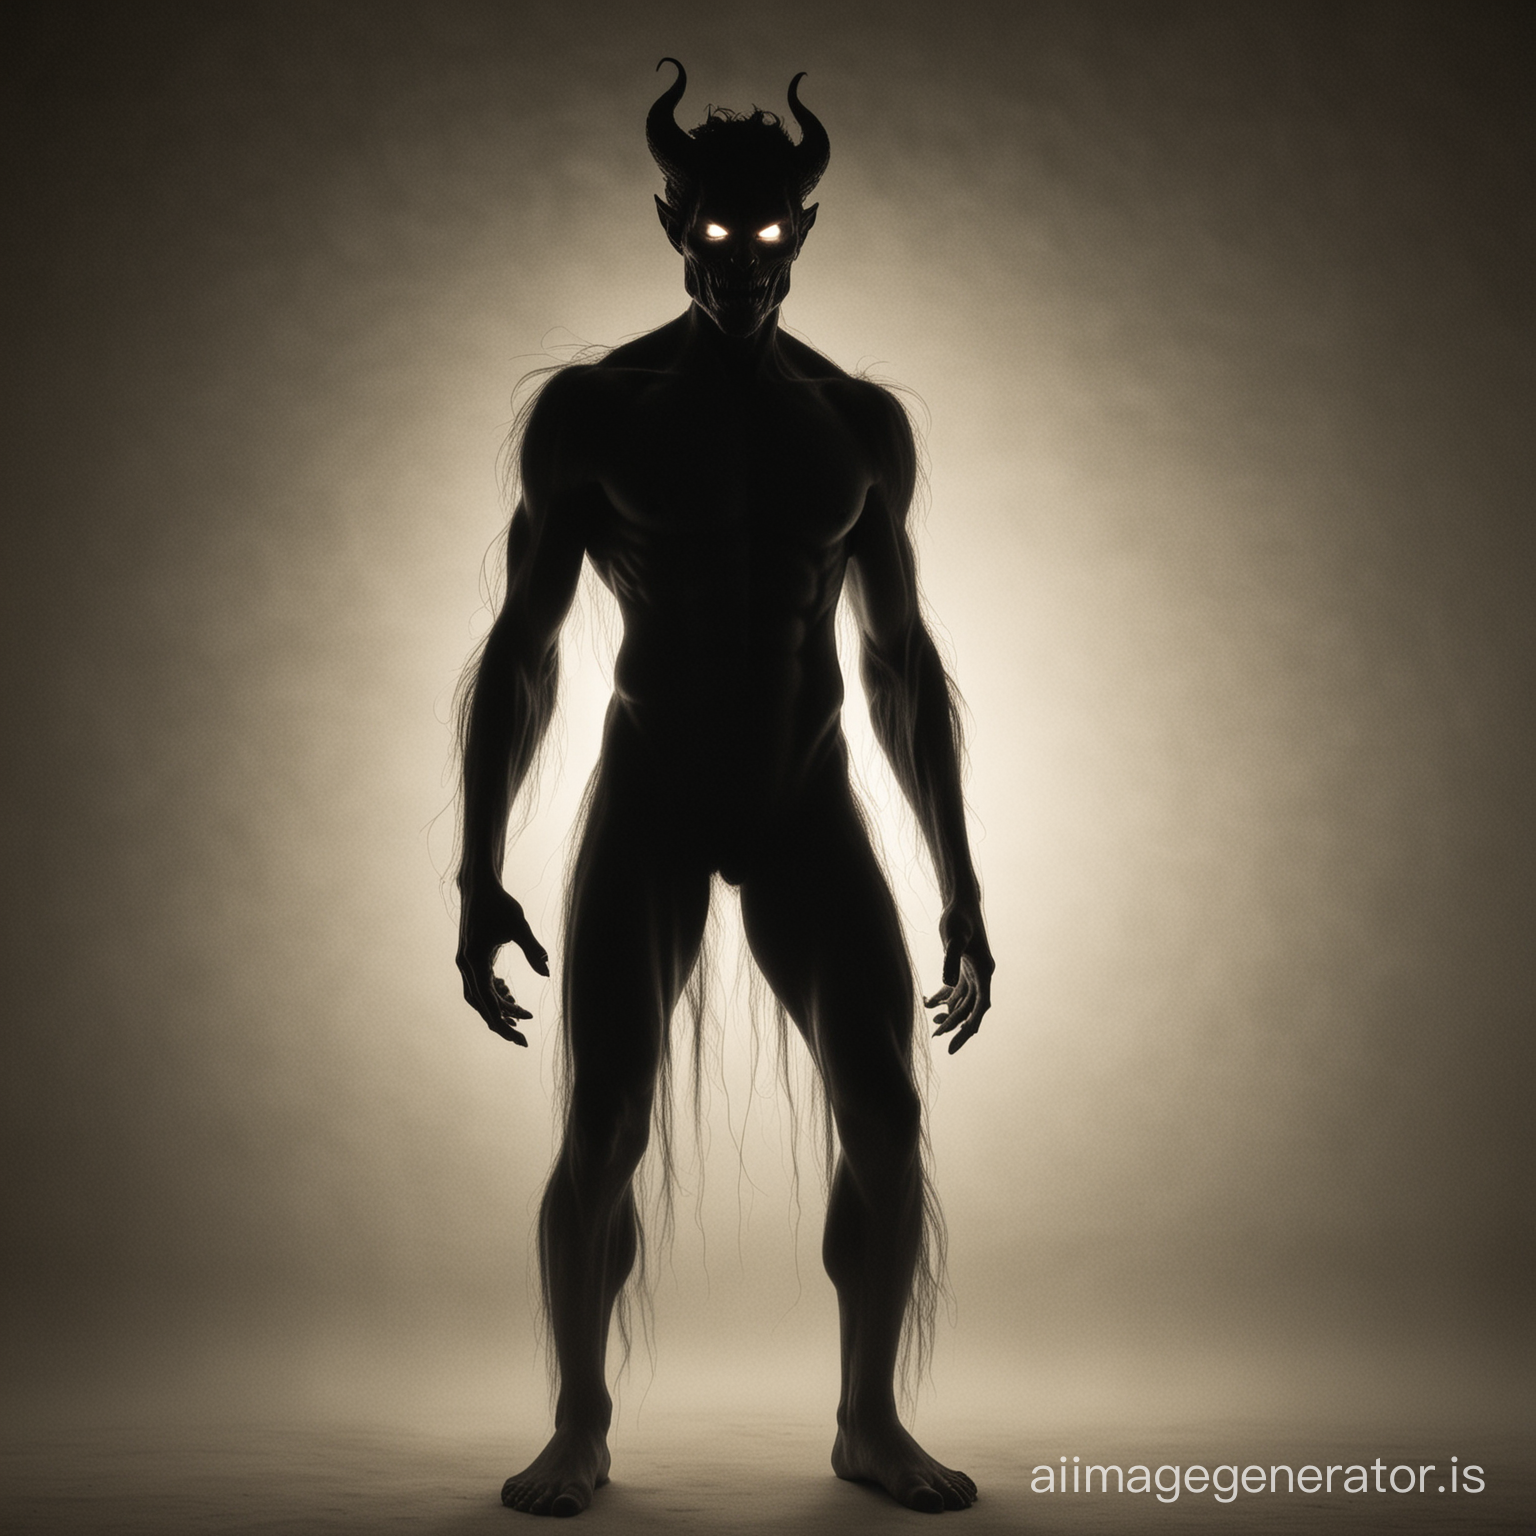 ghostly shadow figure of a demon, flexing